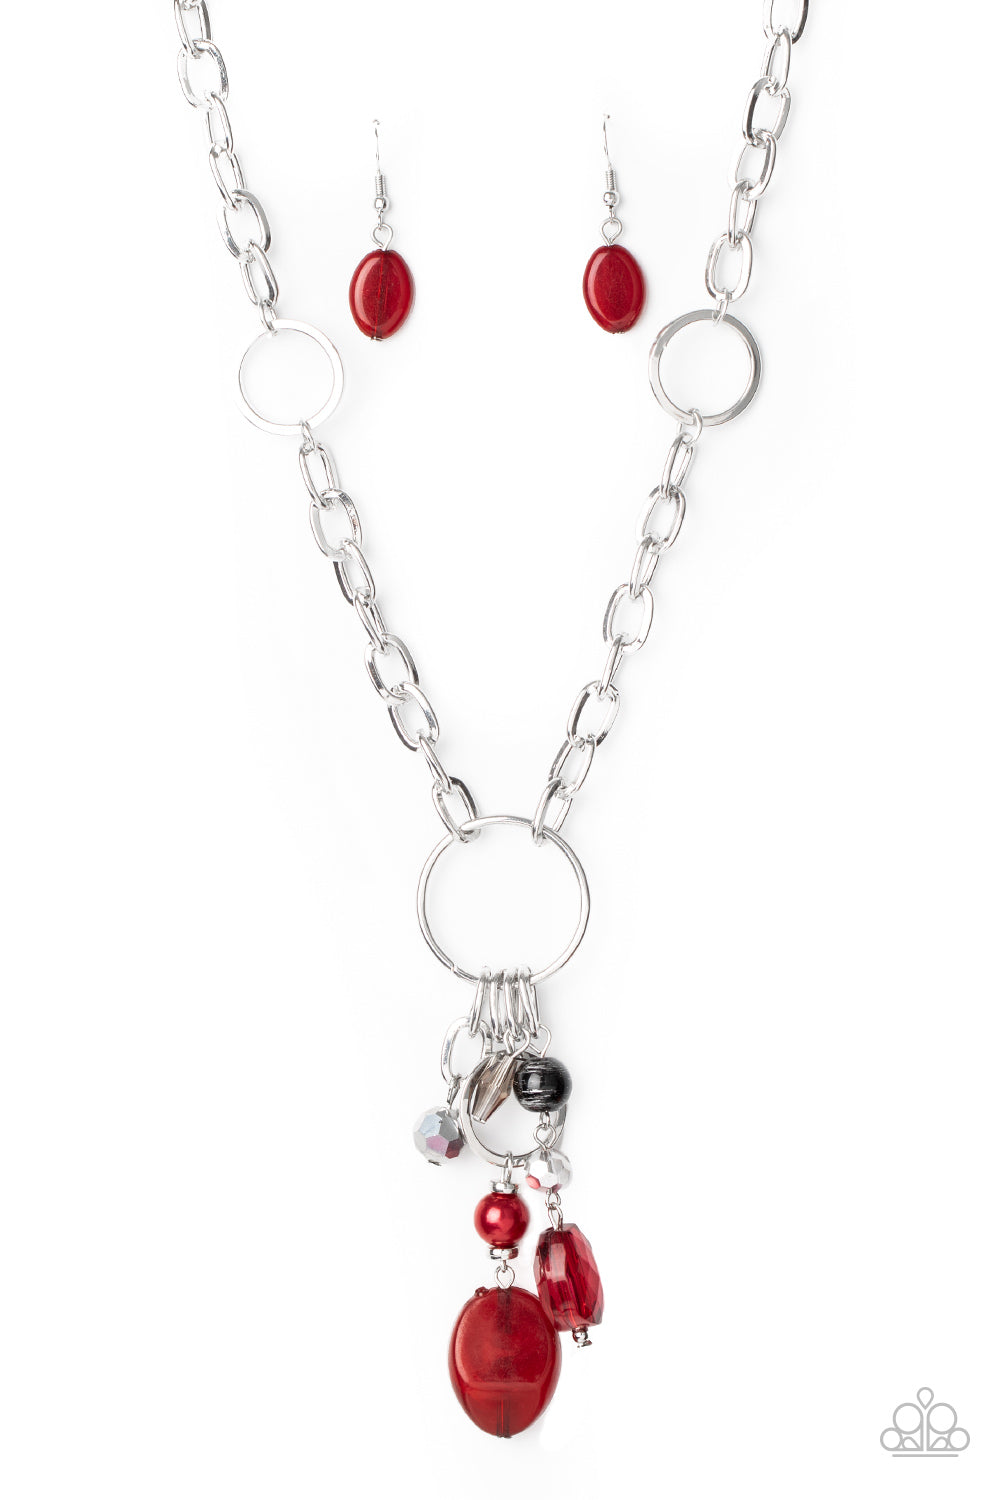 Paparazzi Lay Down Your CHARMS - Red Necklace - A Finishing Touch 